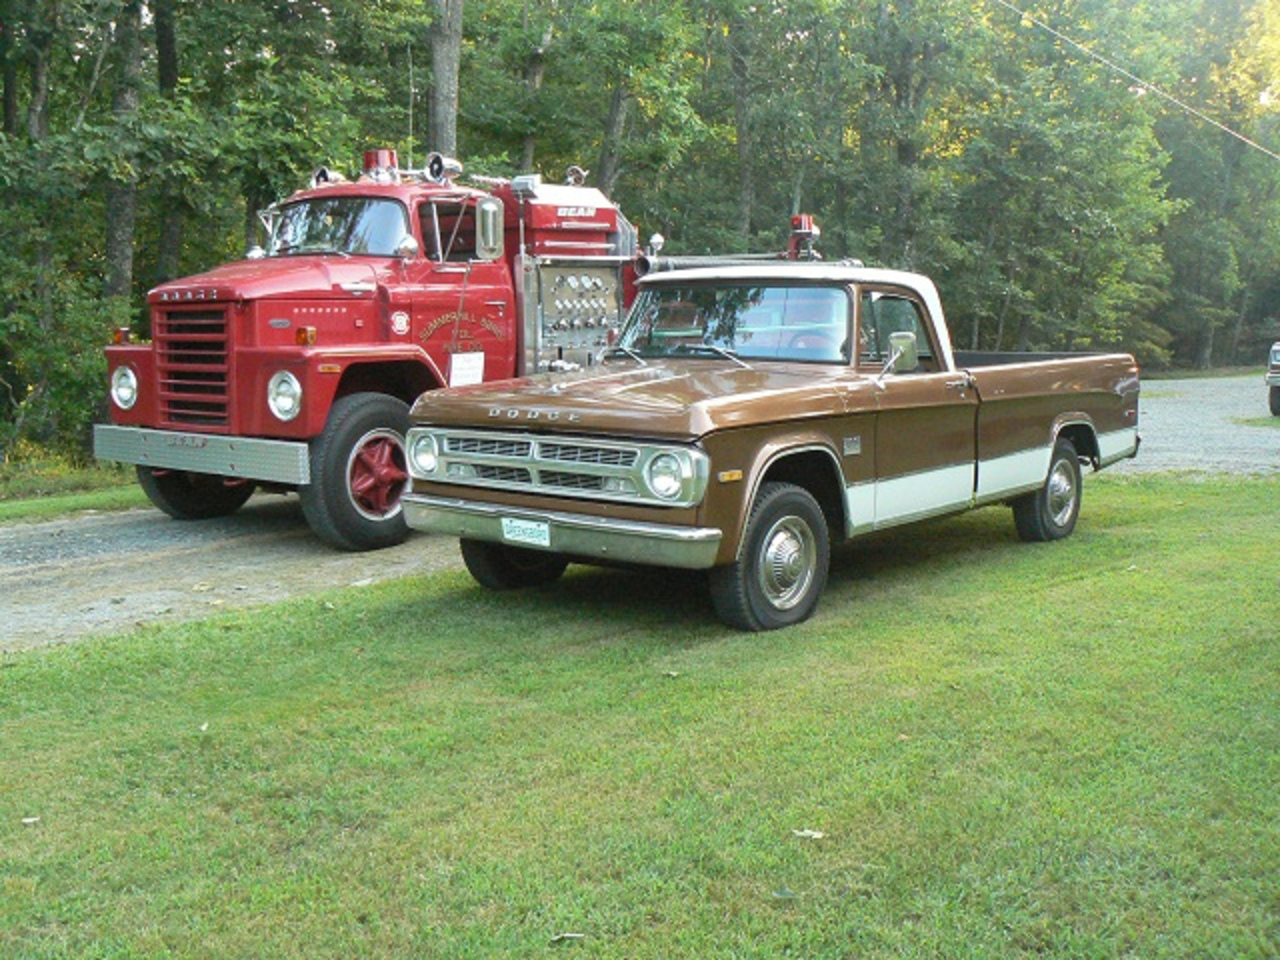 1971 & 1973 Dodge Truck by GStove